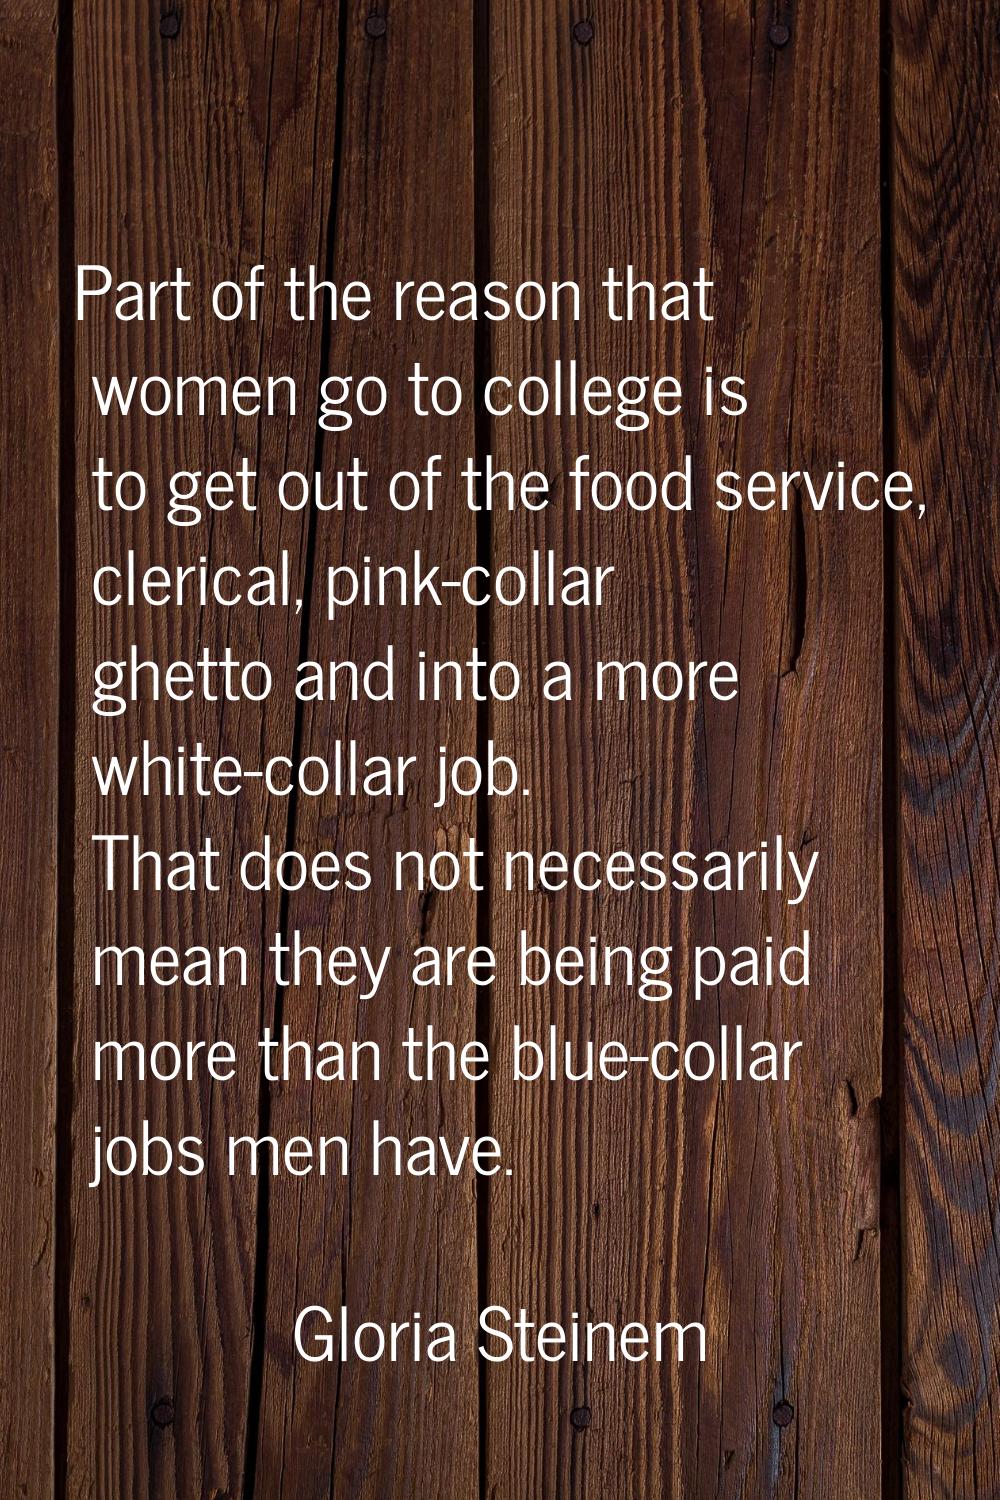 Part of the reason that women go to college is to get out of the food service, clerical, pink-colla